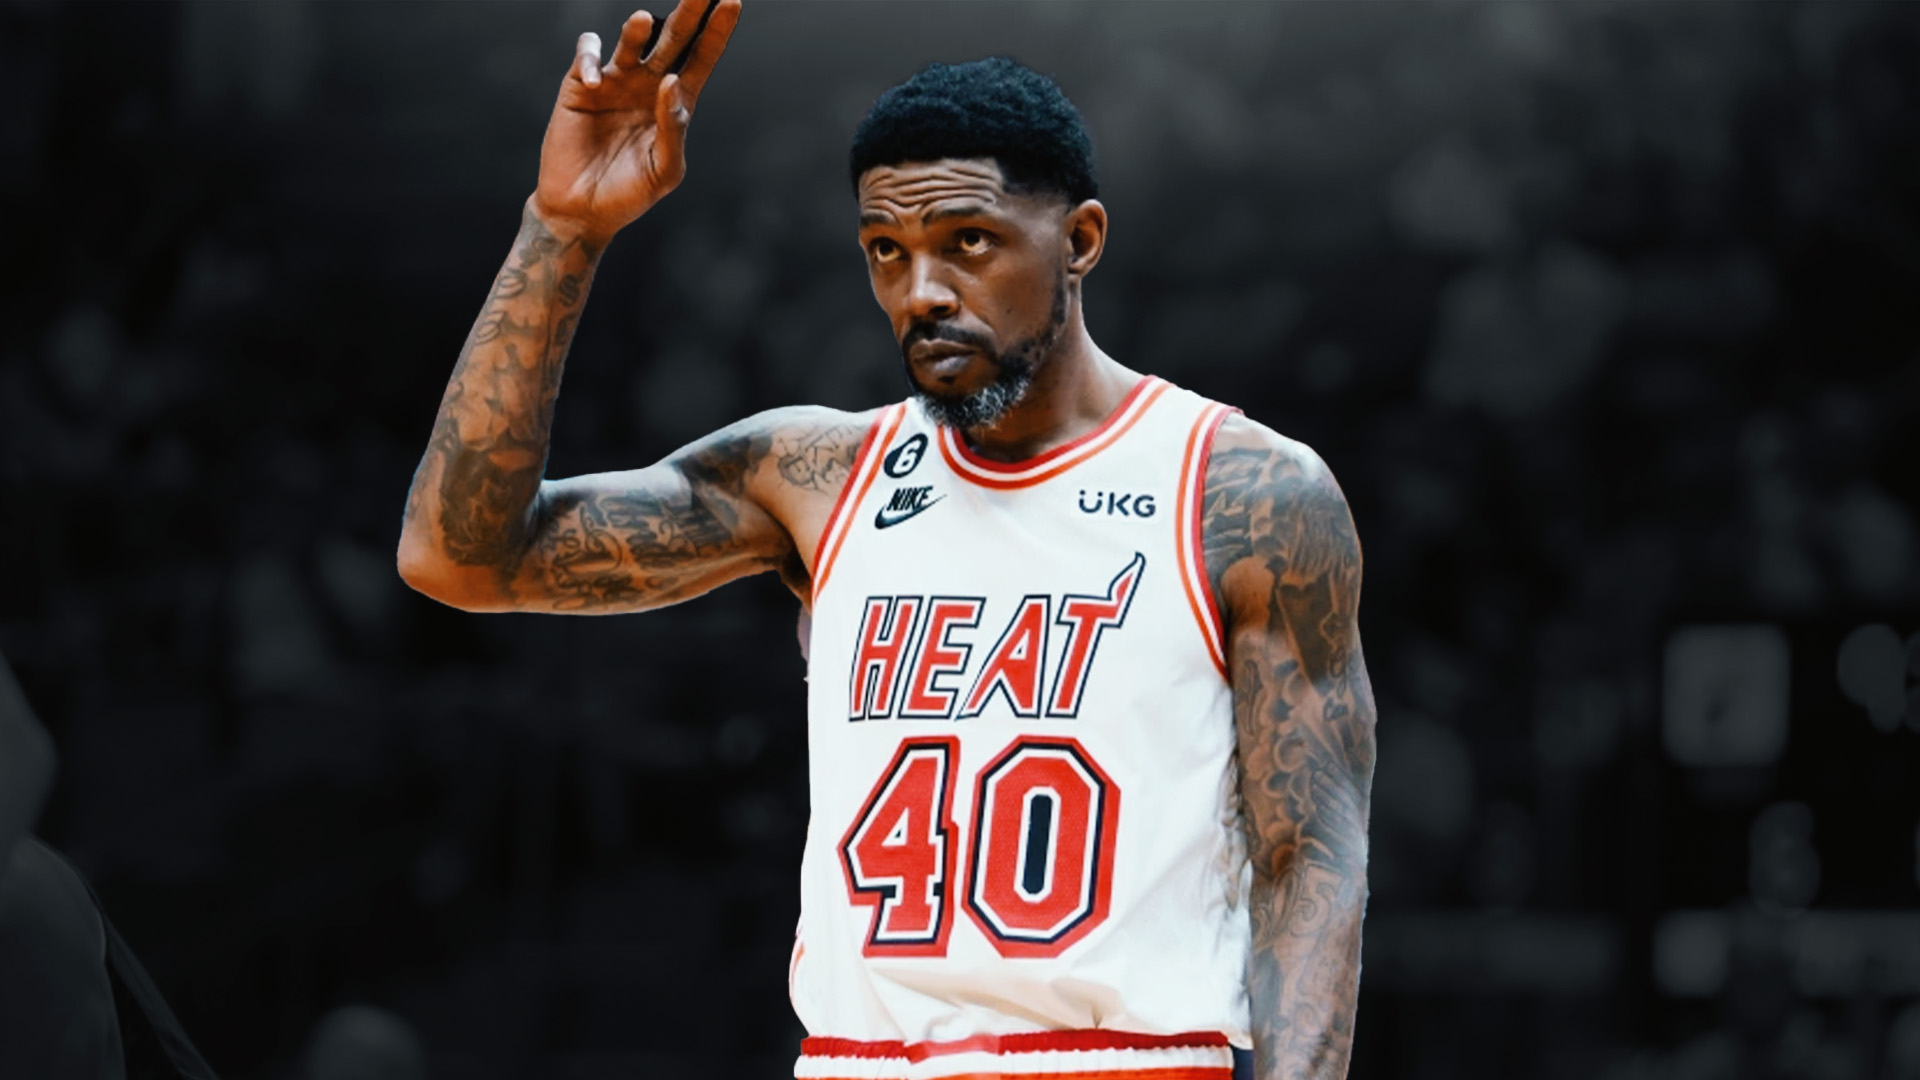 Heat Legend Udonis Haslem Addresses Loss & End of His Career